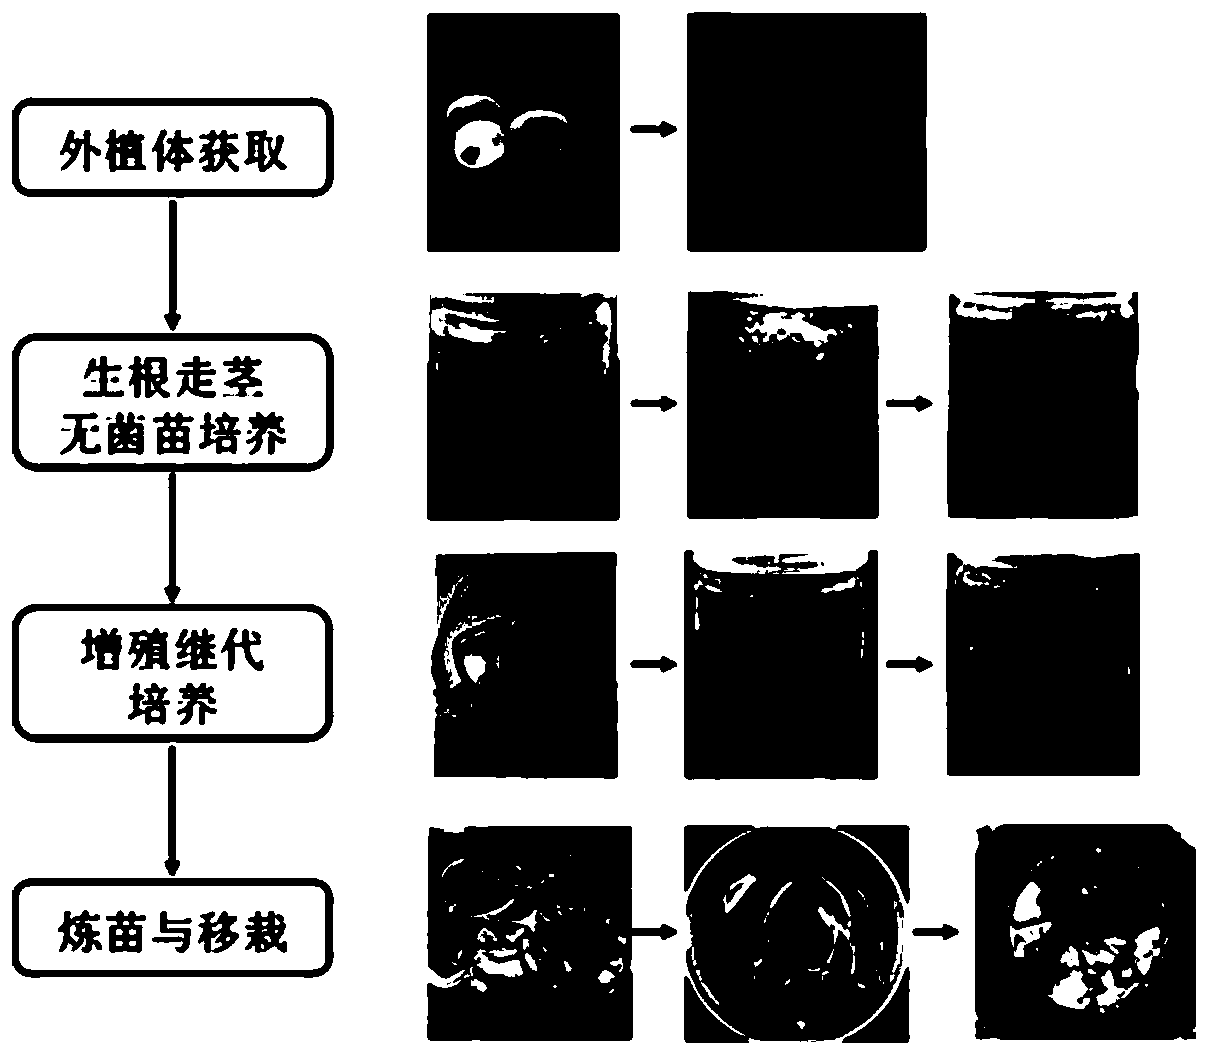 Method for culturing and rapidly propagating tissue culture seedlings of lotus